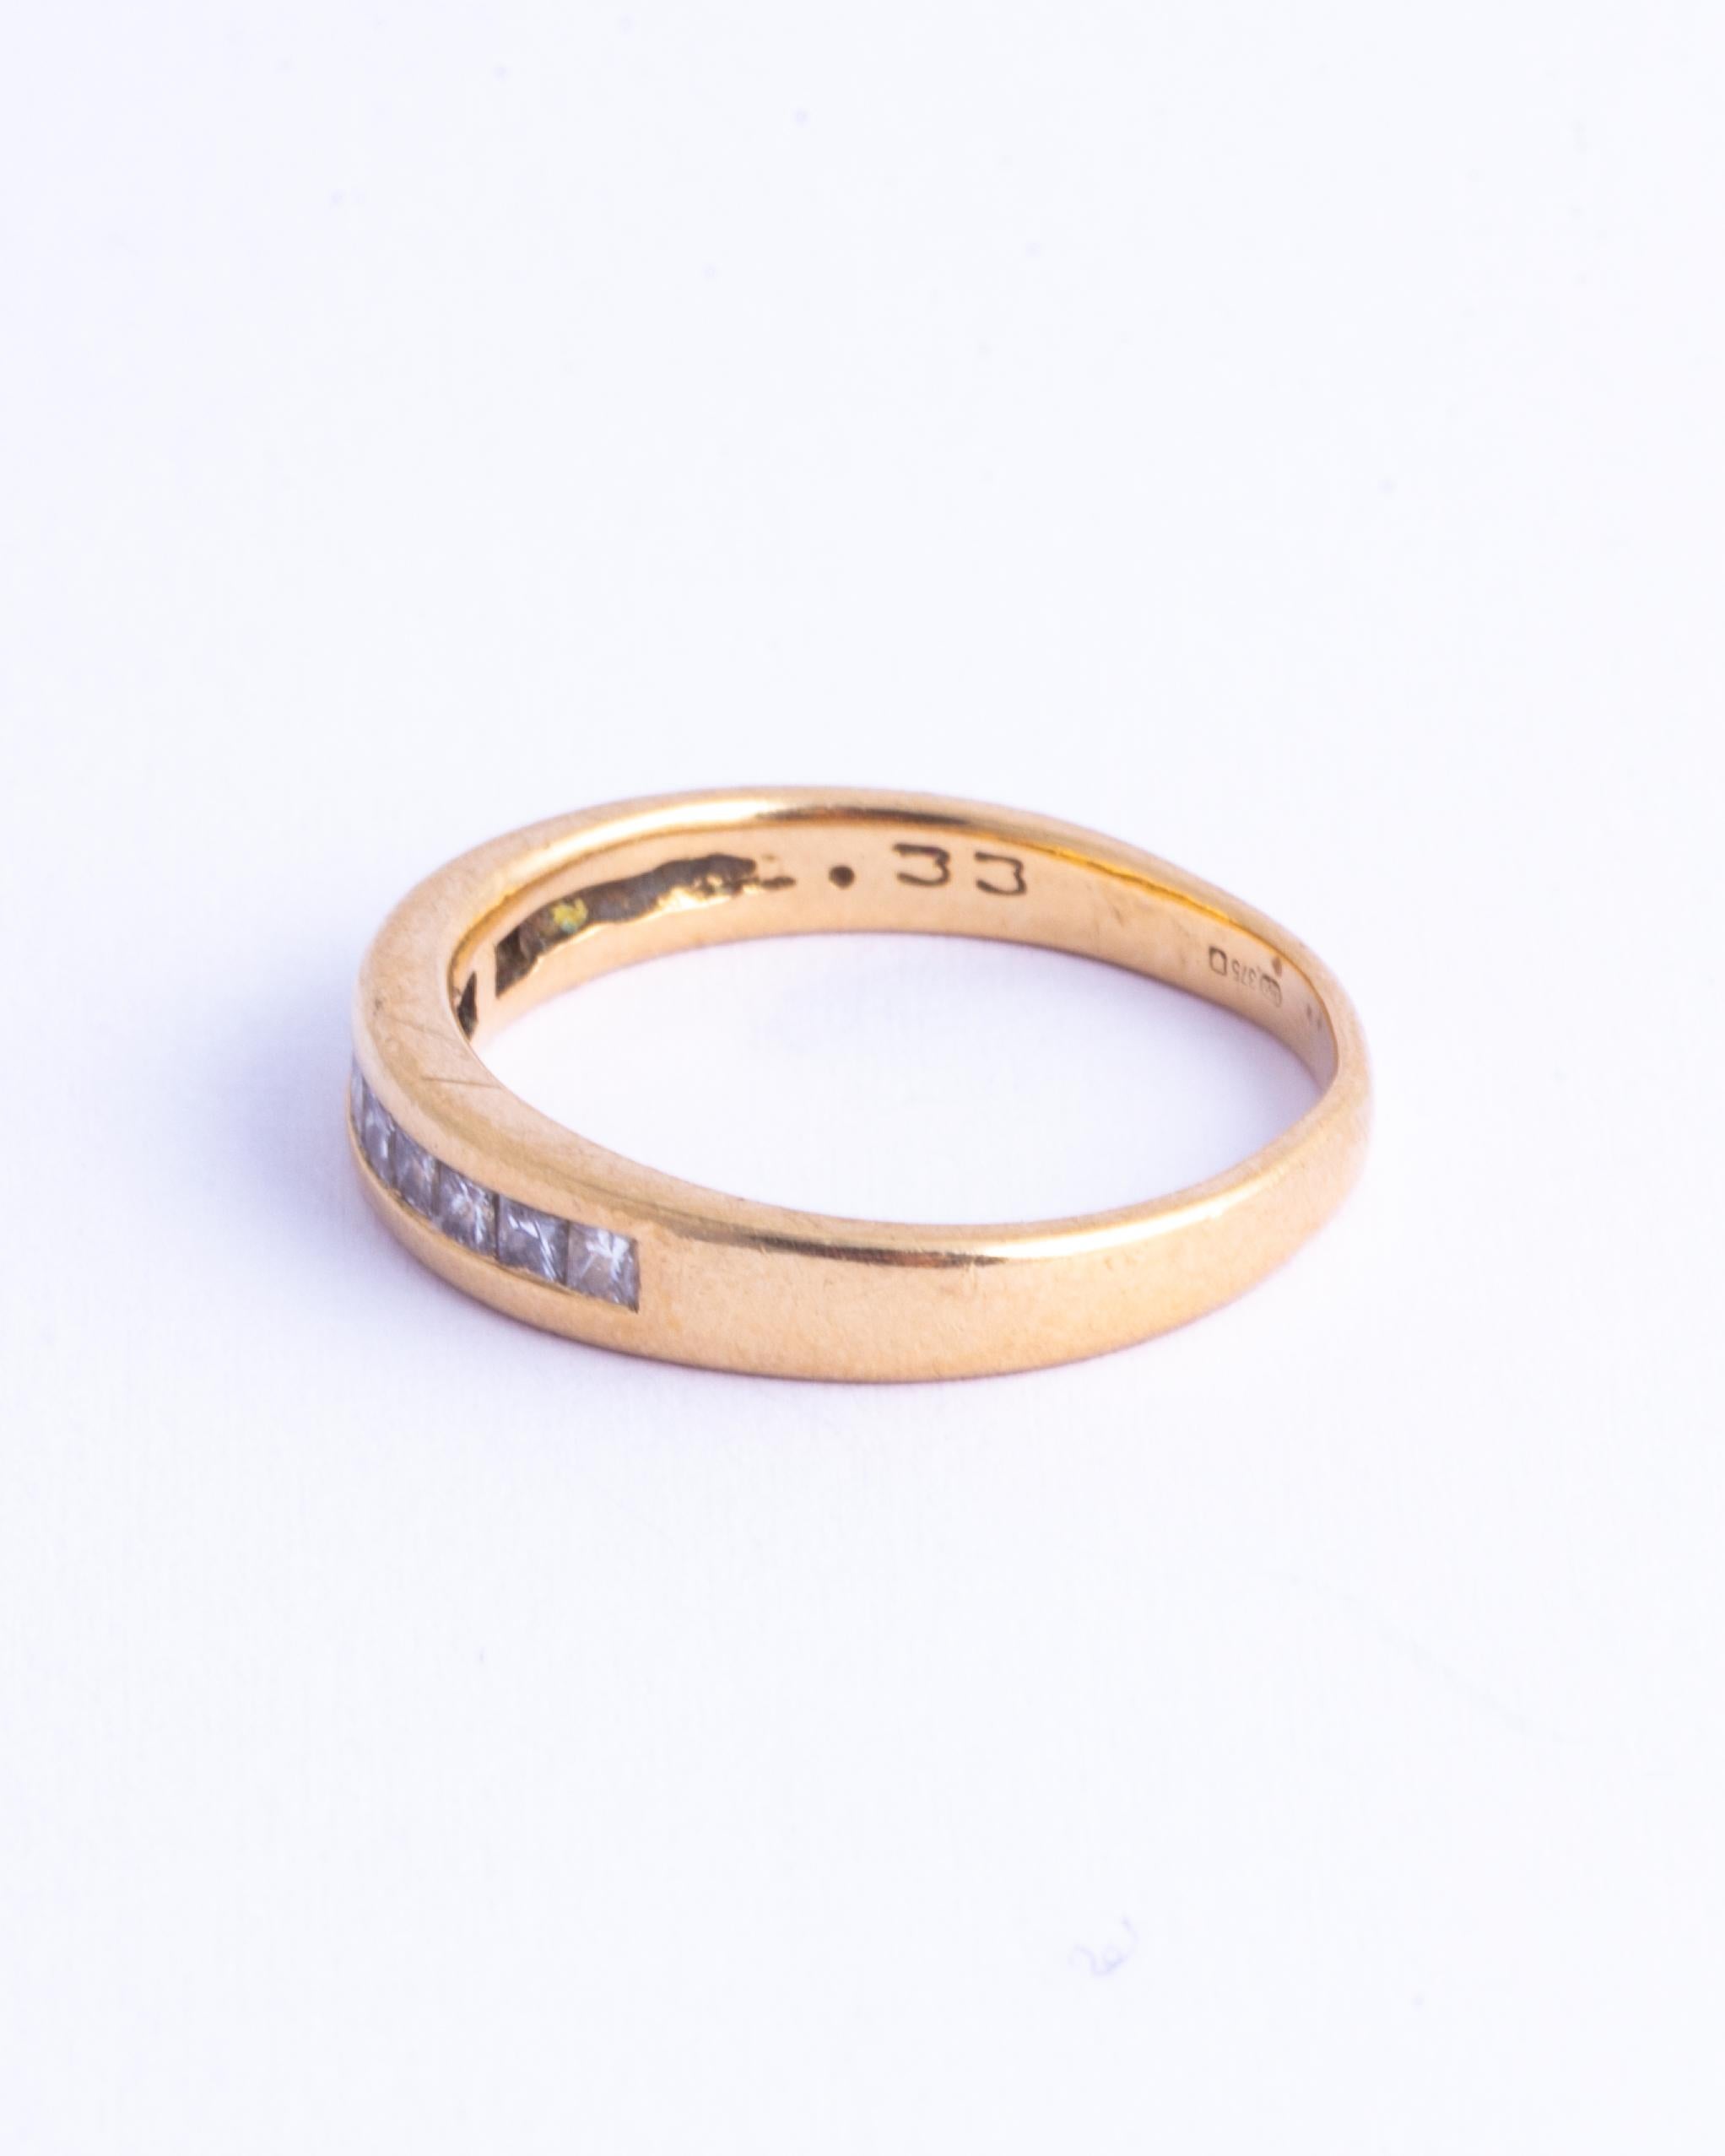 The diamonds set within this 9ct gold band are princess cut and total approx 50pts. They have a great shimmer to them and are bright stones. Made in London, England. 

Ring Size: M or 6 1/4 
Band Width: 4mm 

Weight: 2.5g